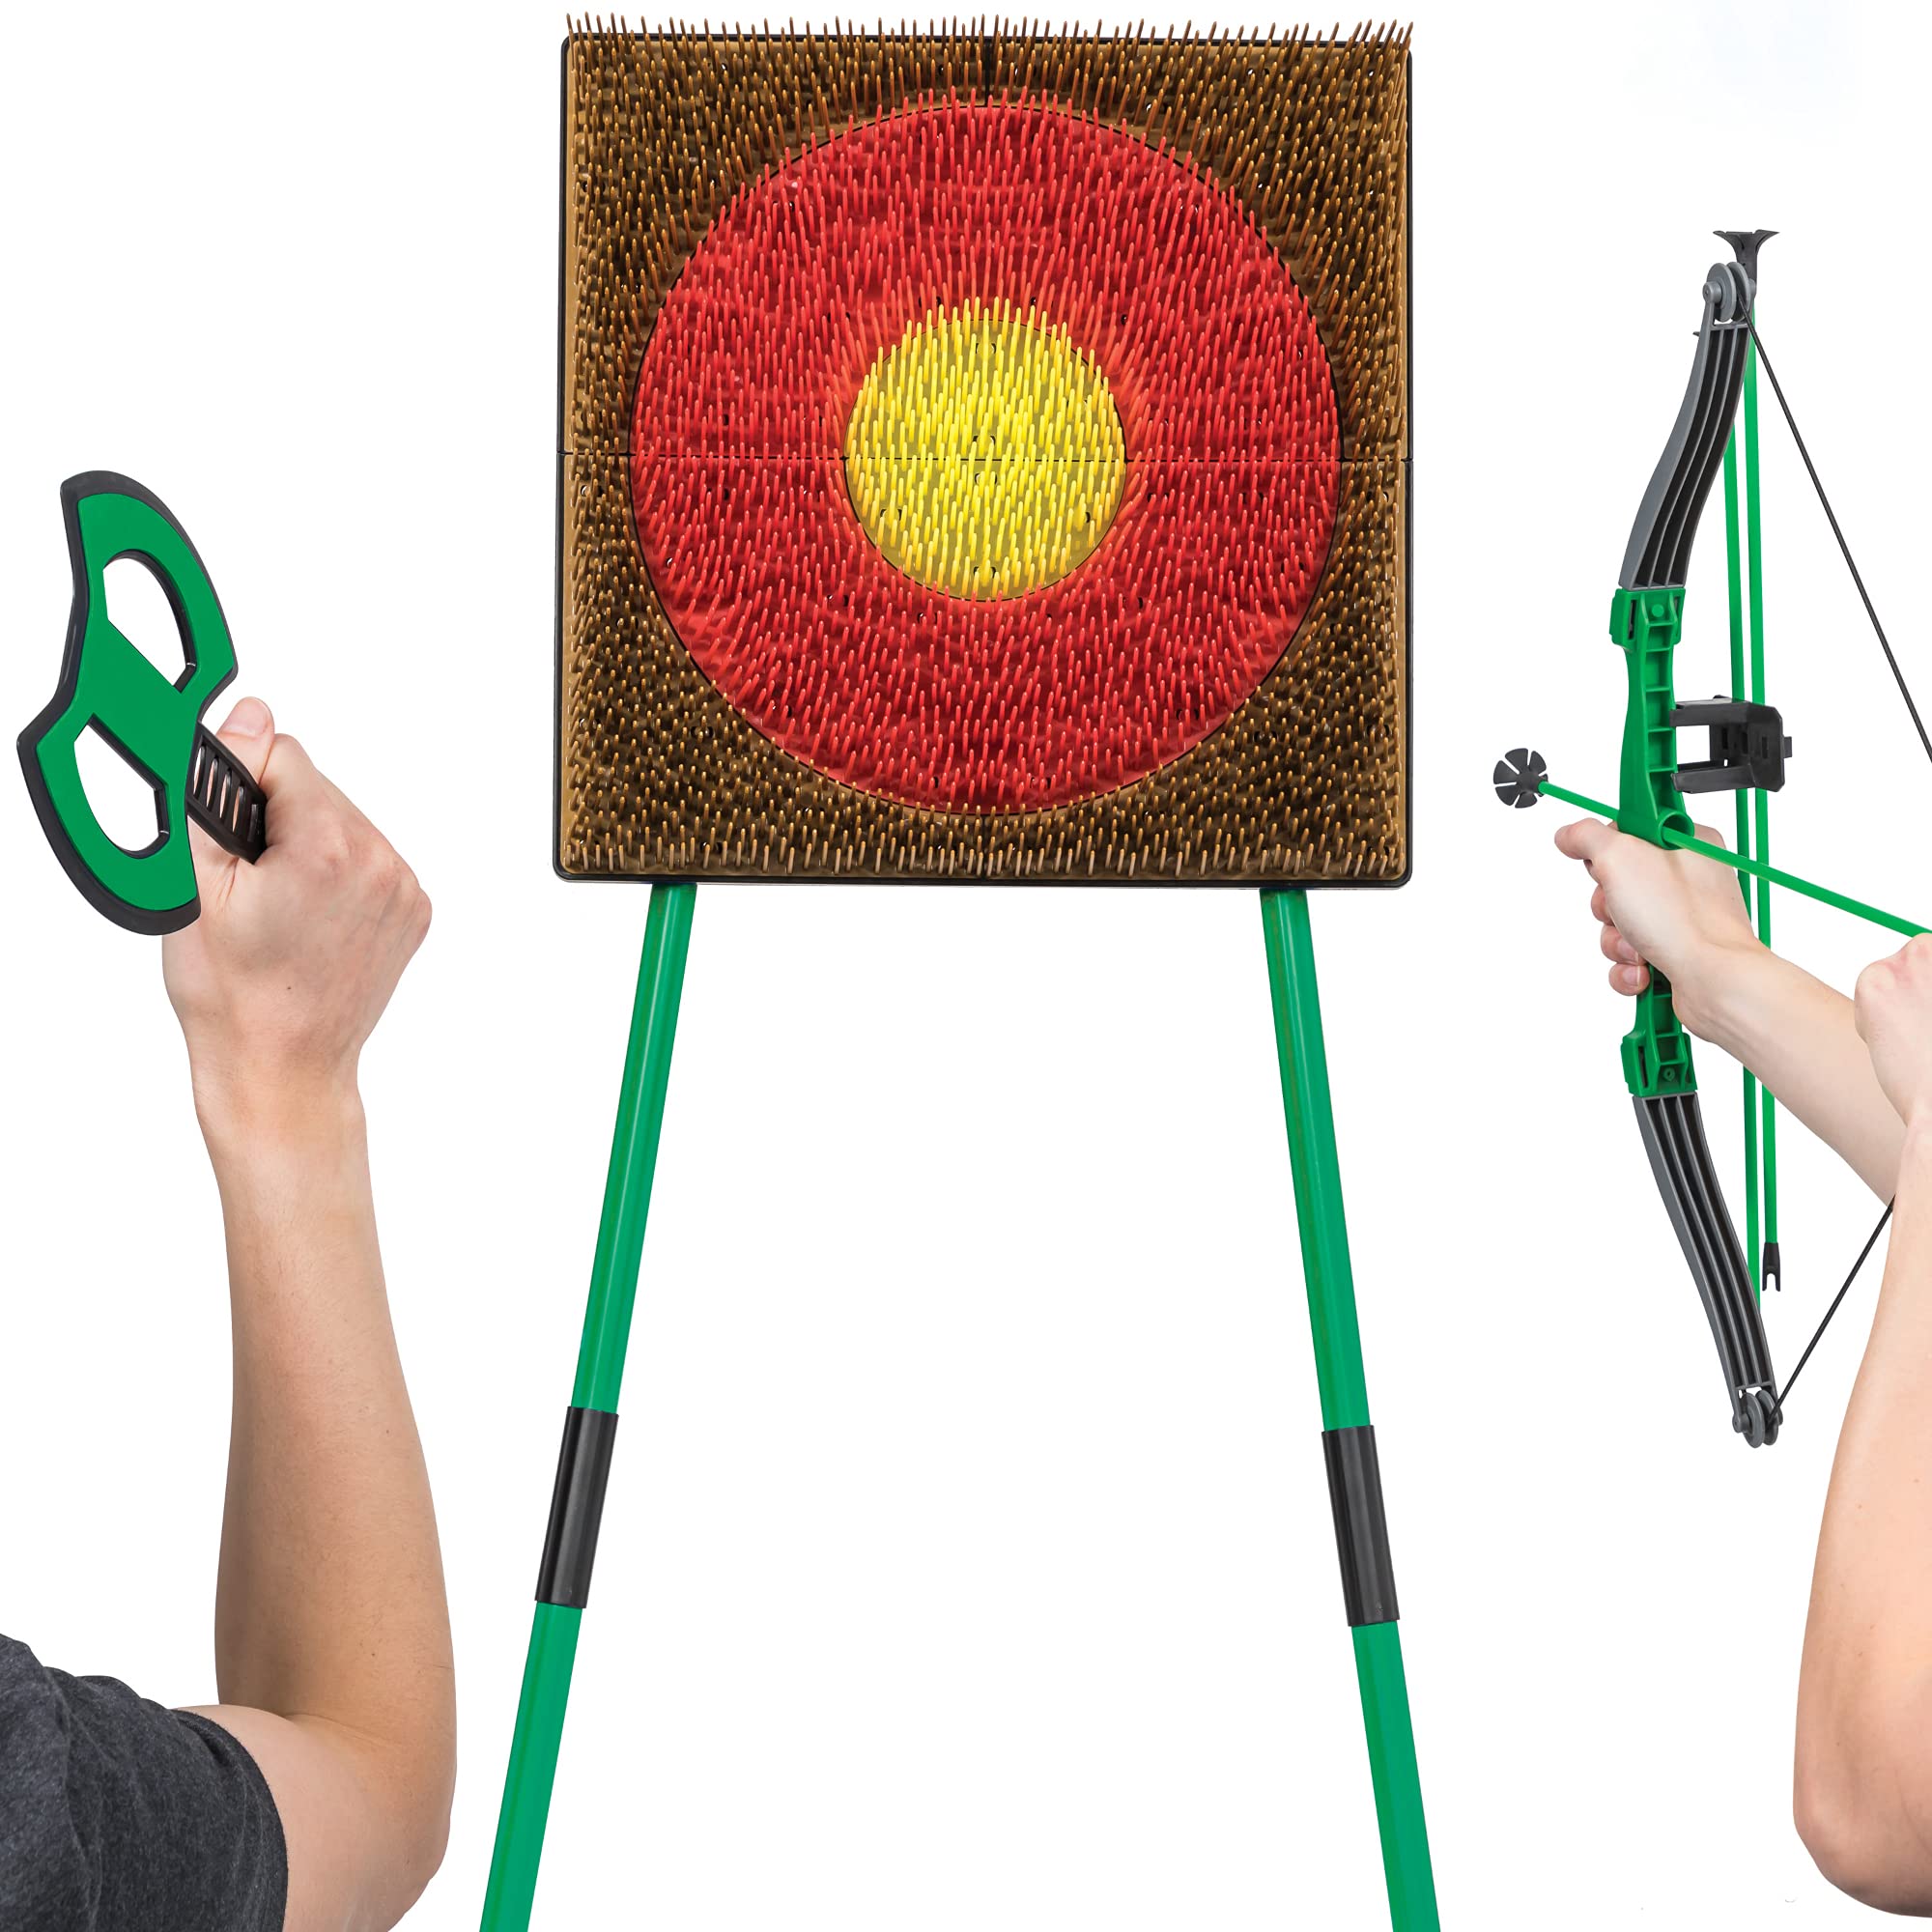 Go! Gater EastPoint Sports 2-in-1 Tomahawk Toss & Archery Game Set – Includes Tomahawks and Arrows with Bristle Target for The Backyard, Park, Indoors and Outdoors